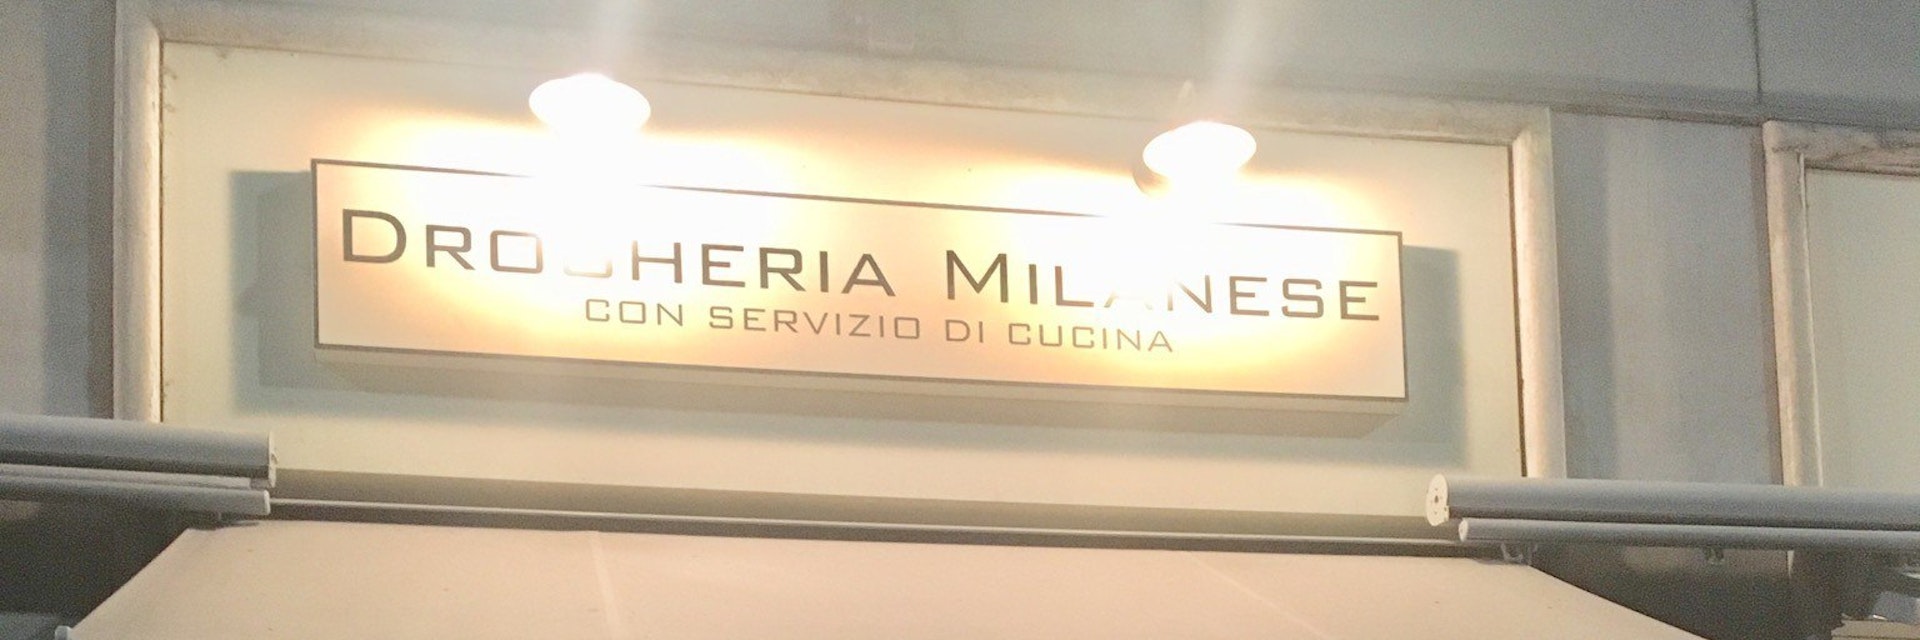 Entrance to Drogheria Milanese